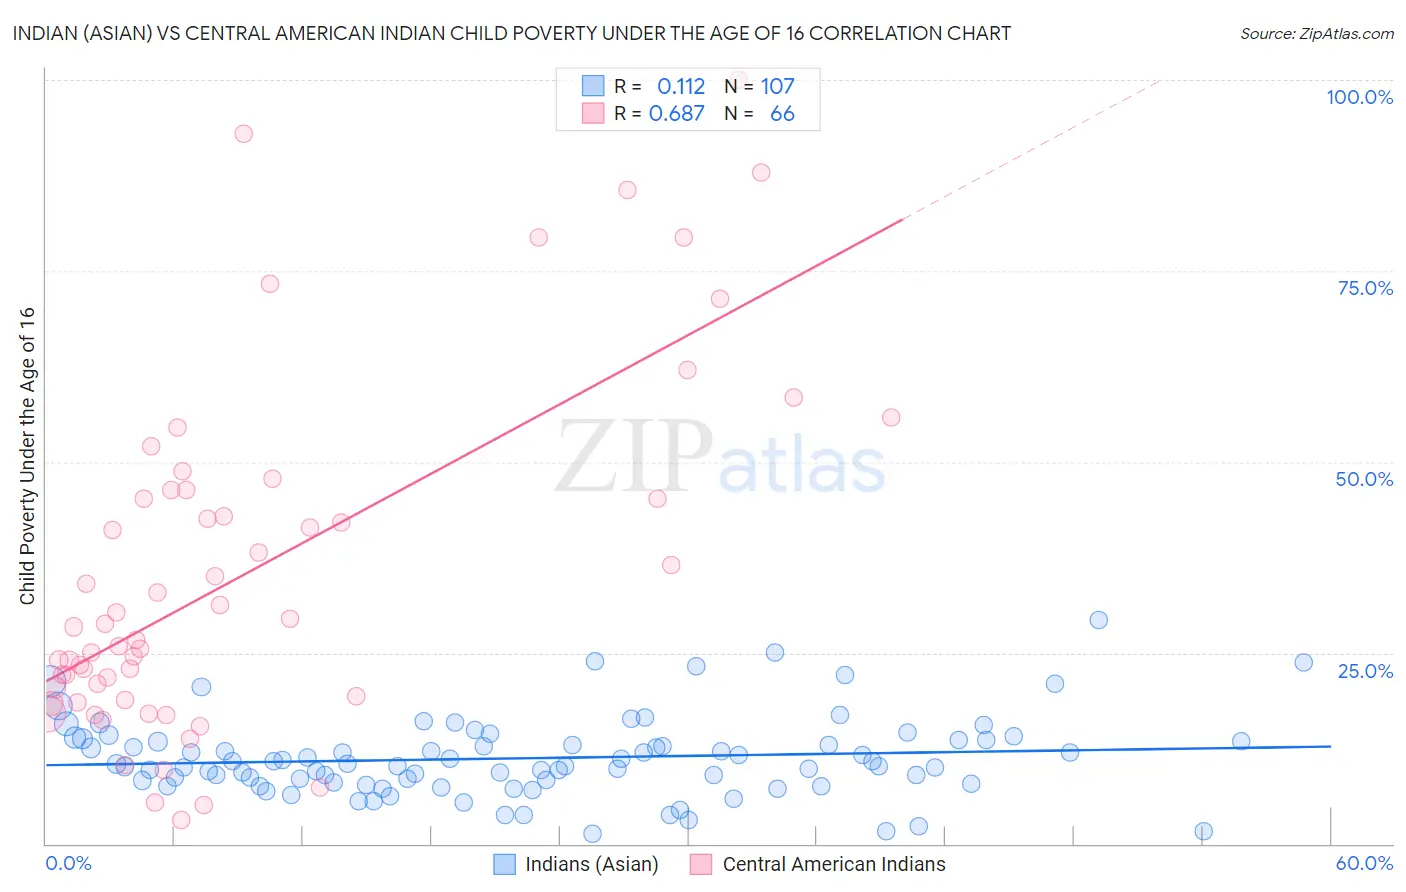 Indian (Asian) vs Central American Indian Child Poverty Under the Age of 16